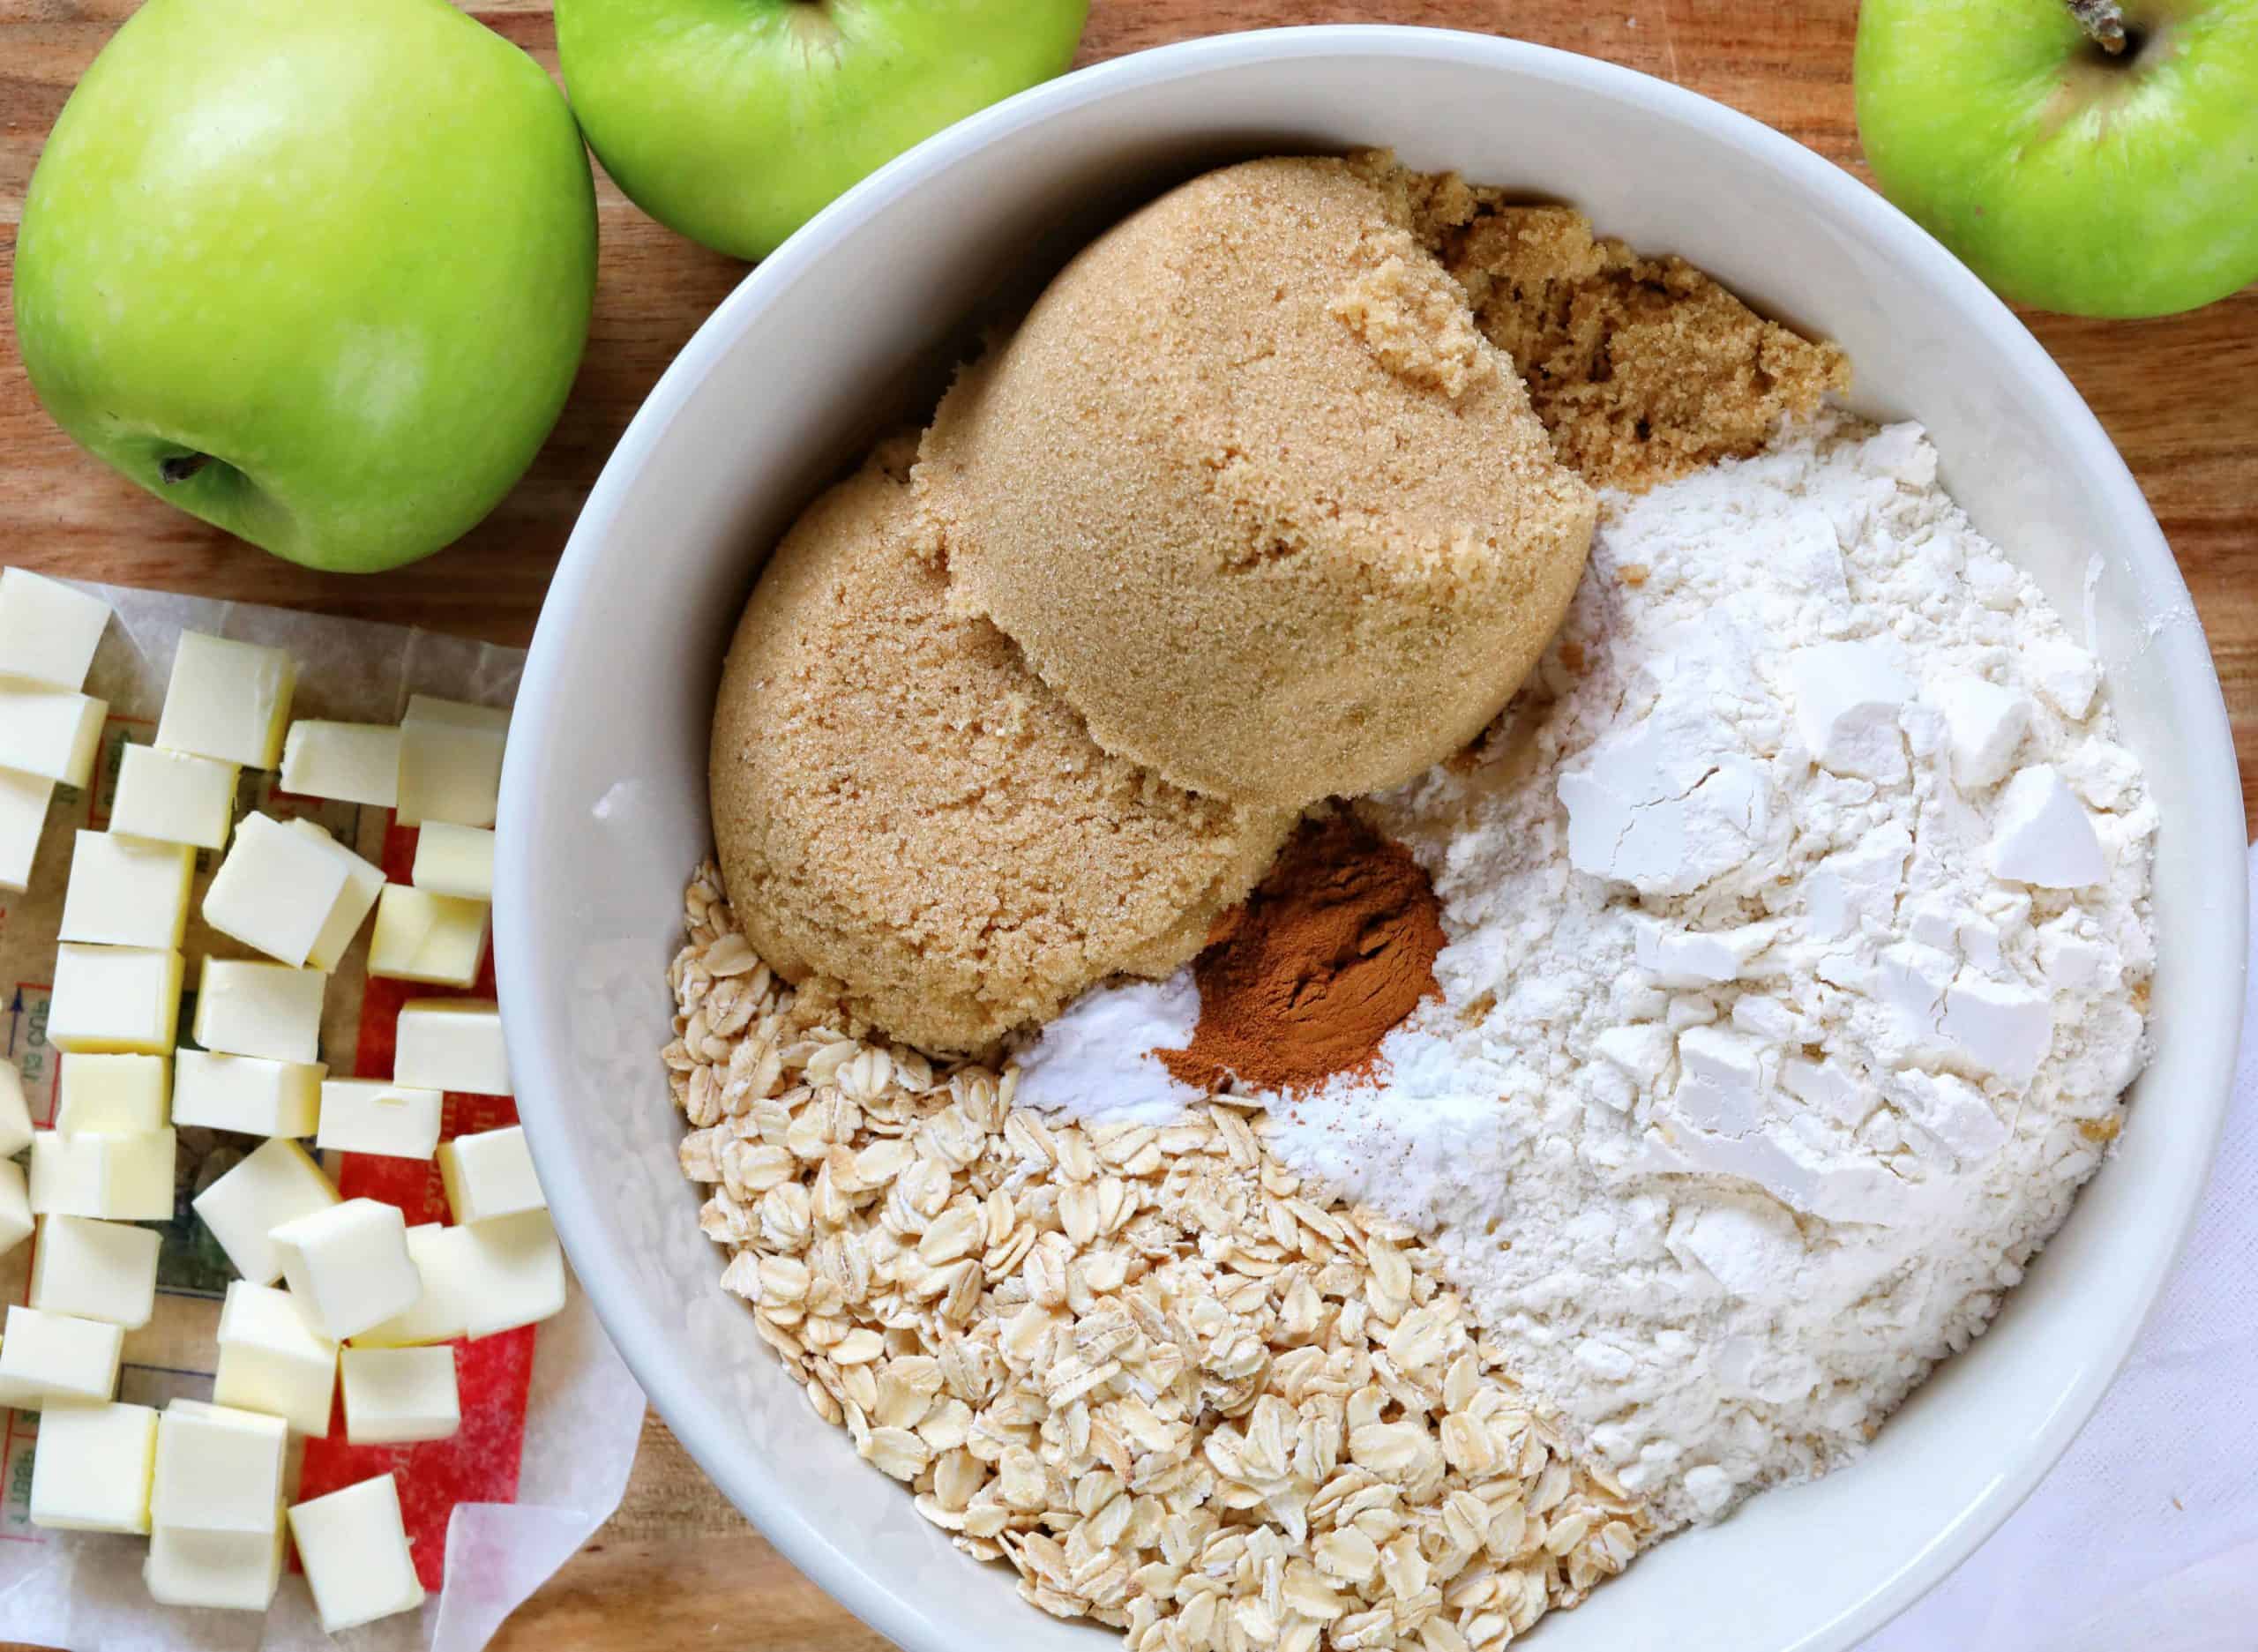 How to Make Apple Crisp, Raw Ingredients in Bowl and on Cutting Board.